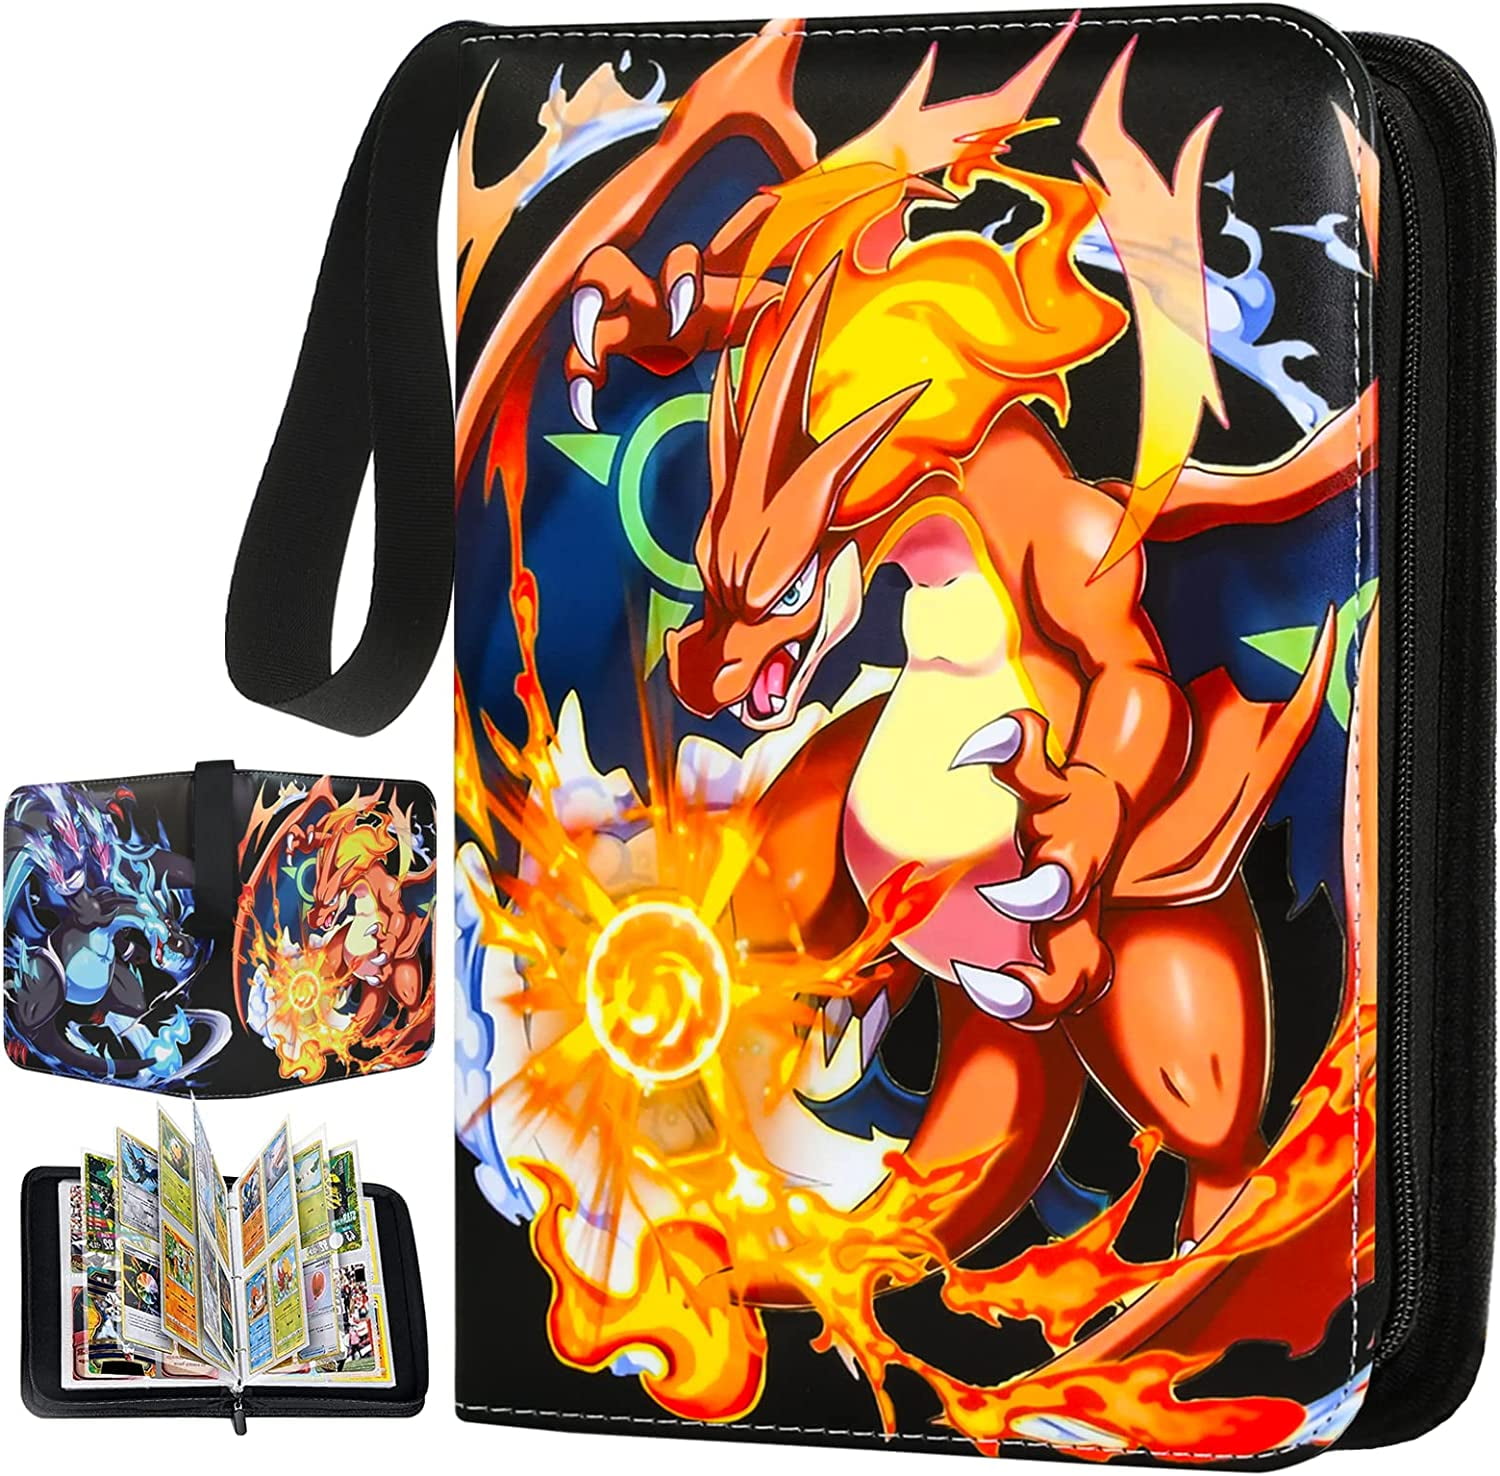 Card Binder for Pokemon Cards Holder 4-Pocket, Trading Card Games  Collection Binder Case Book Fits 400 Cards With 50 Removable Sleeves  Display Storage Carrying Case for TCG 